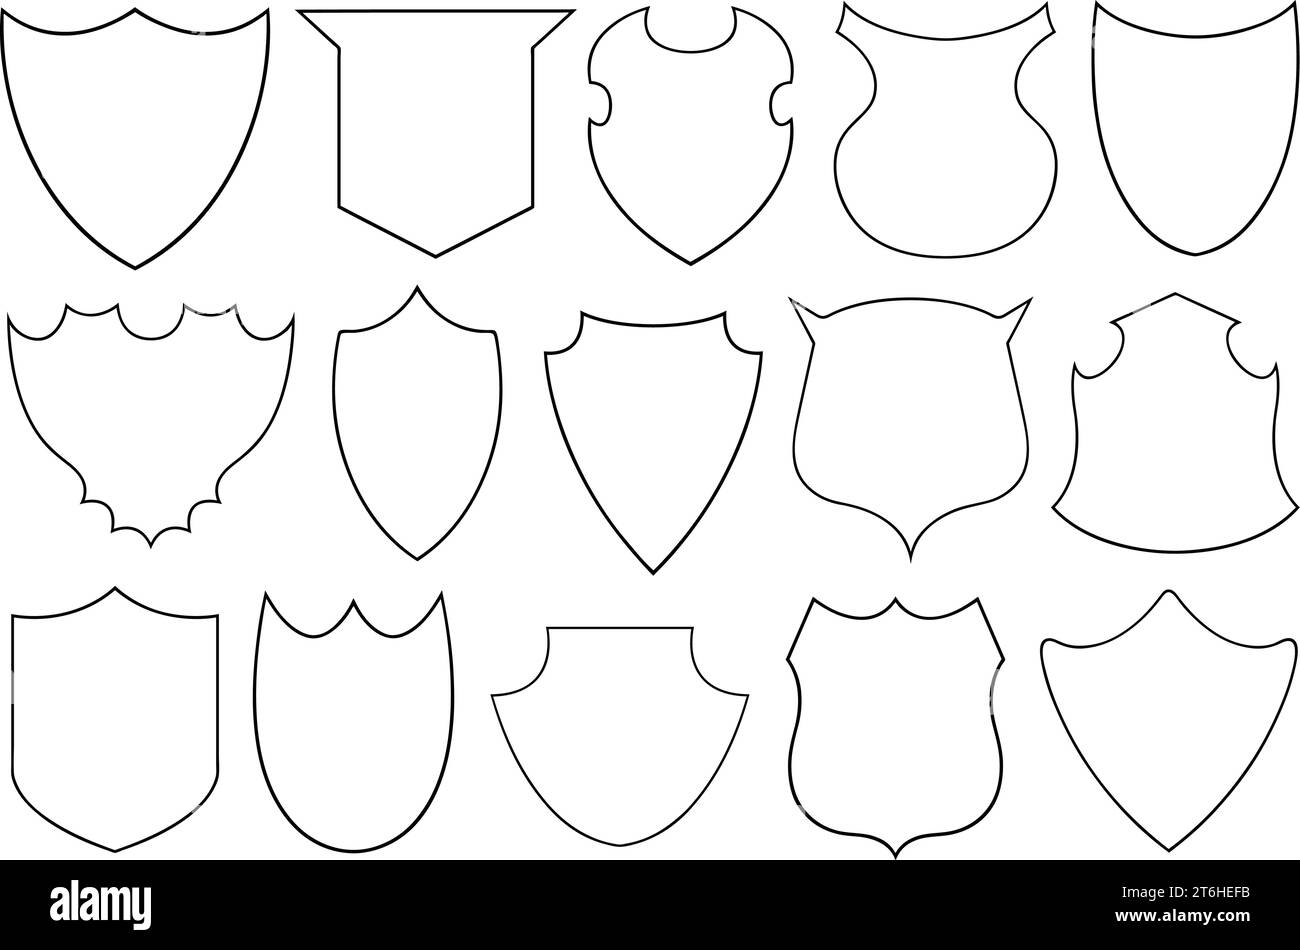 Collection of different shields illustration isolated on white Stock Vector